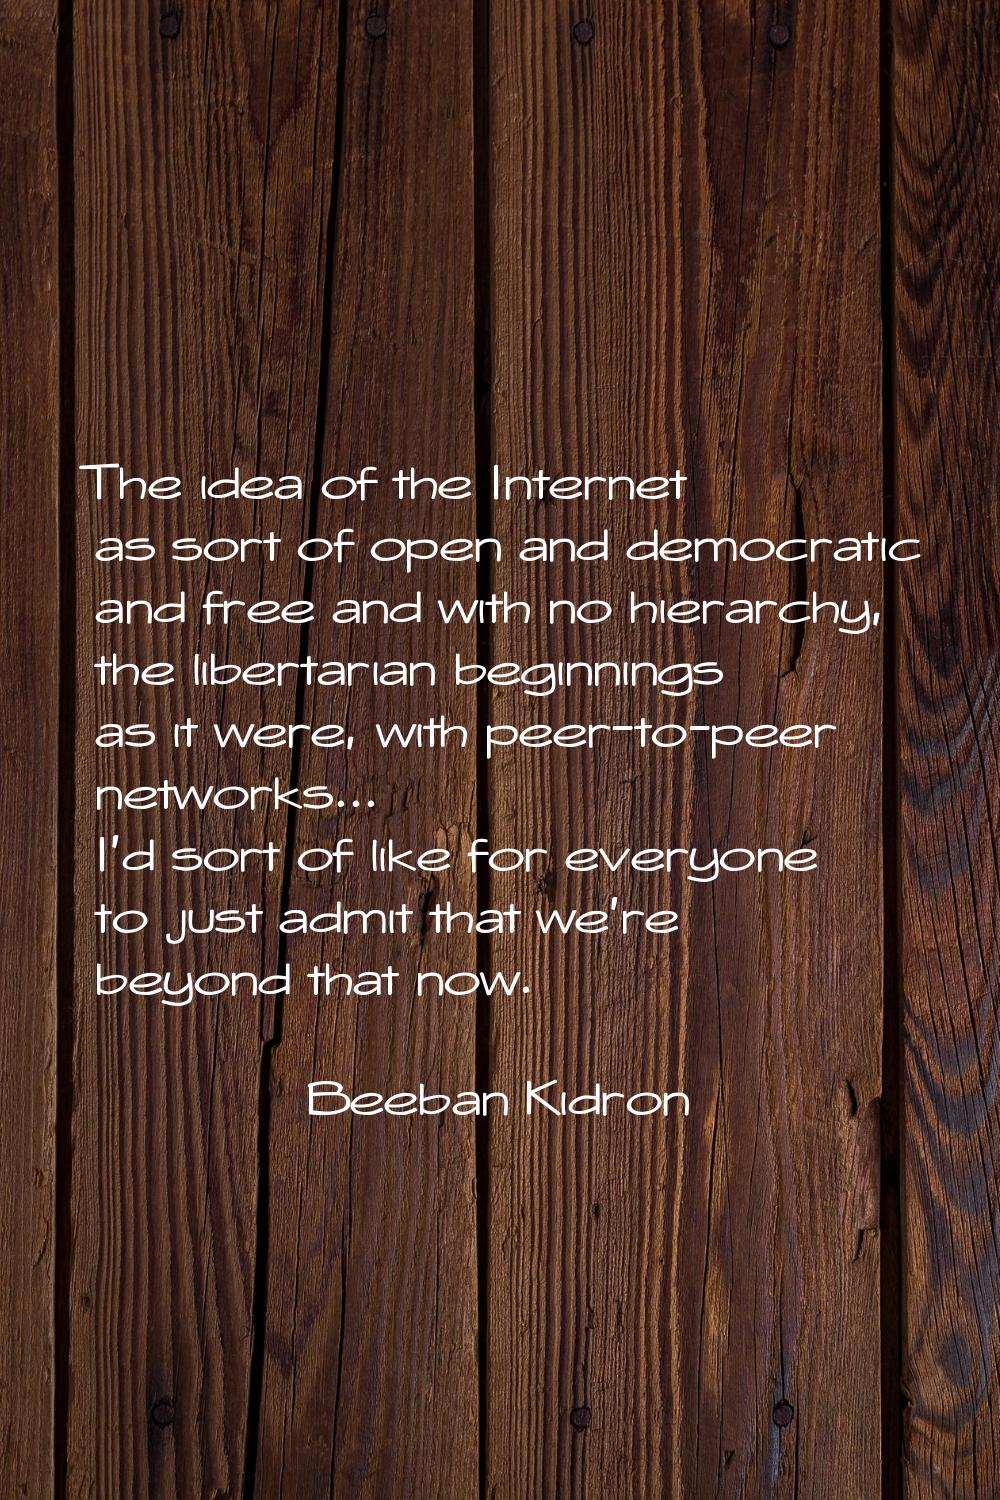 The idea of the Internet as sort of open and democratic and free and with no hierarchy, the liberta